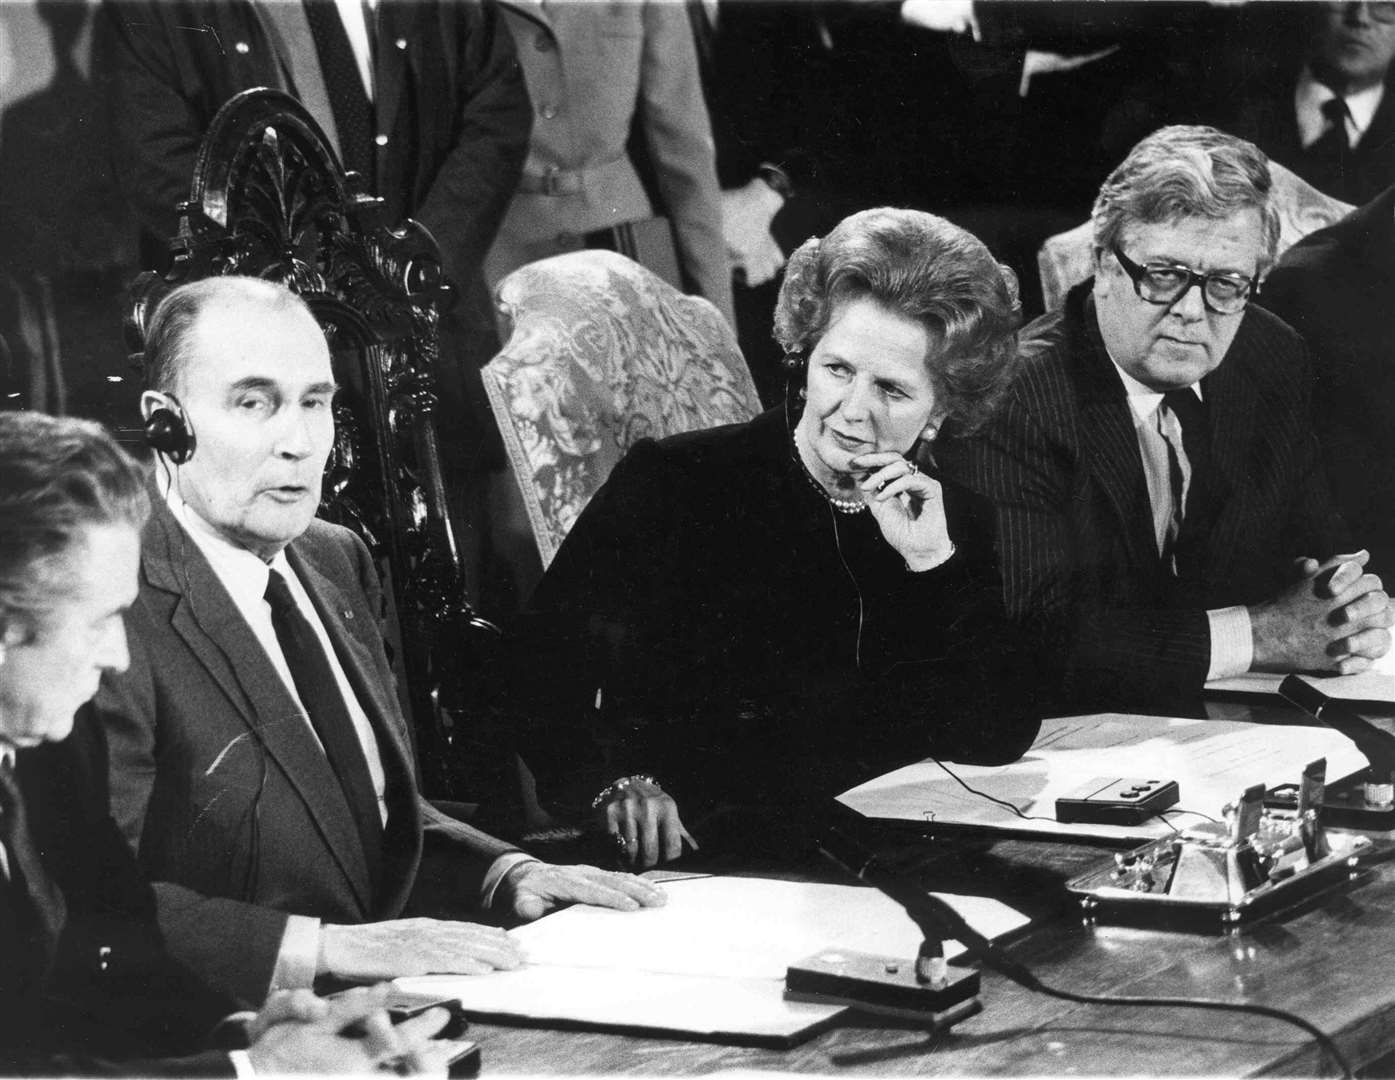 Prime Minister Margaret Thatcher and President Francois Mitterand sign the Channel Tunnel treaty at a ceremony at Canterbury Cathedral in February 1986